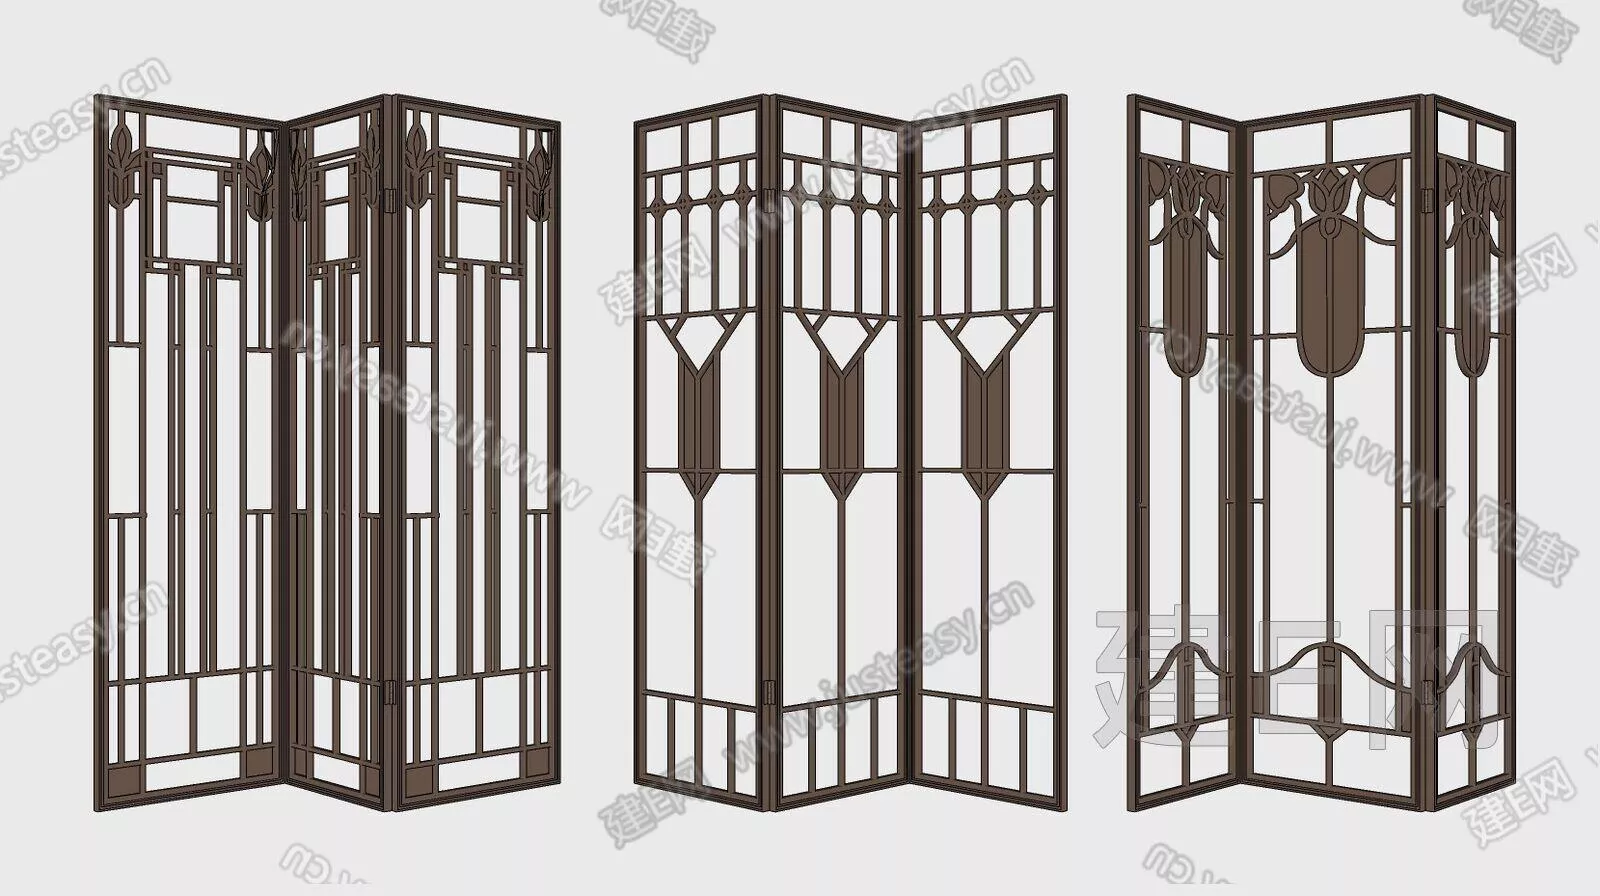 CHINESE PARTITION SCREEN - SKETCHUP 3D MODEL - ENSCAPE - 111755522